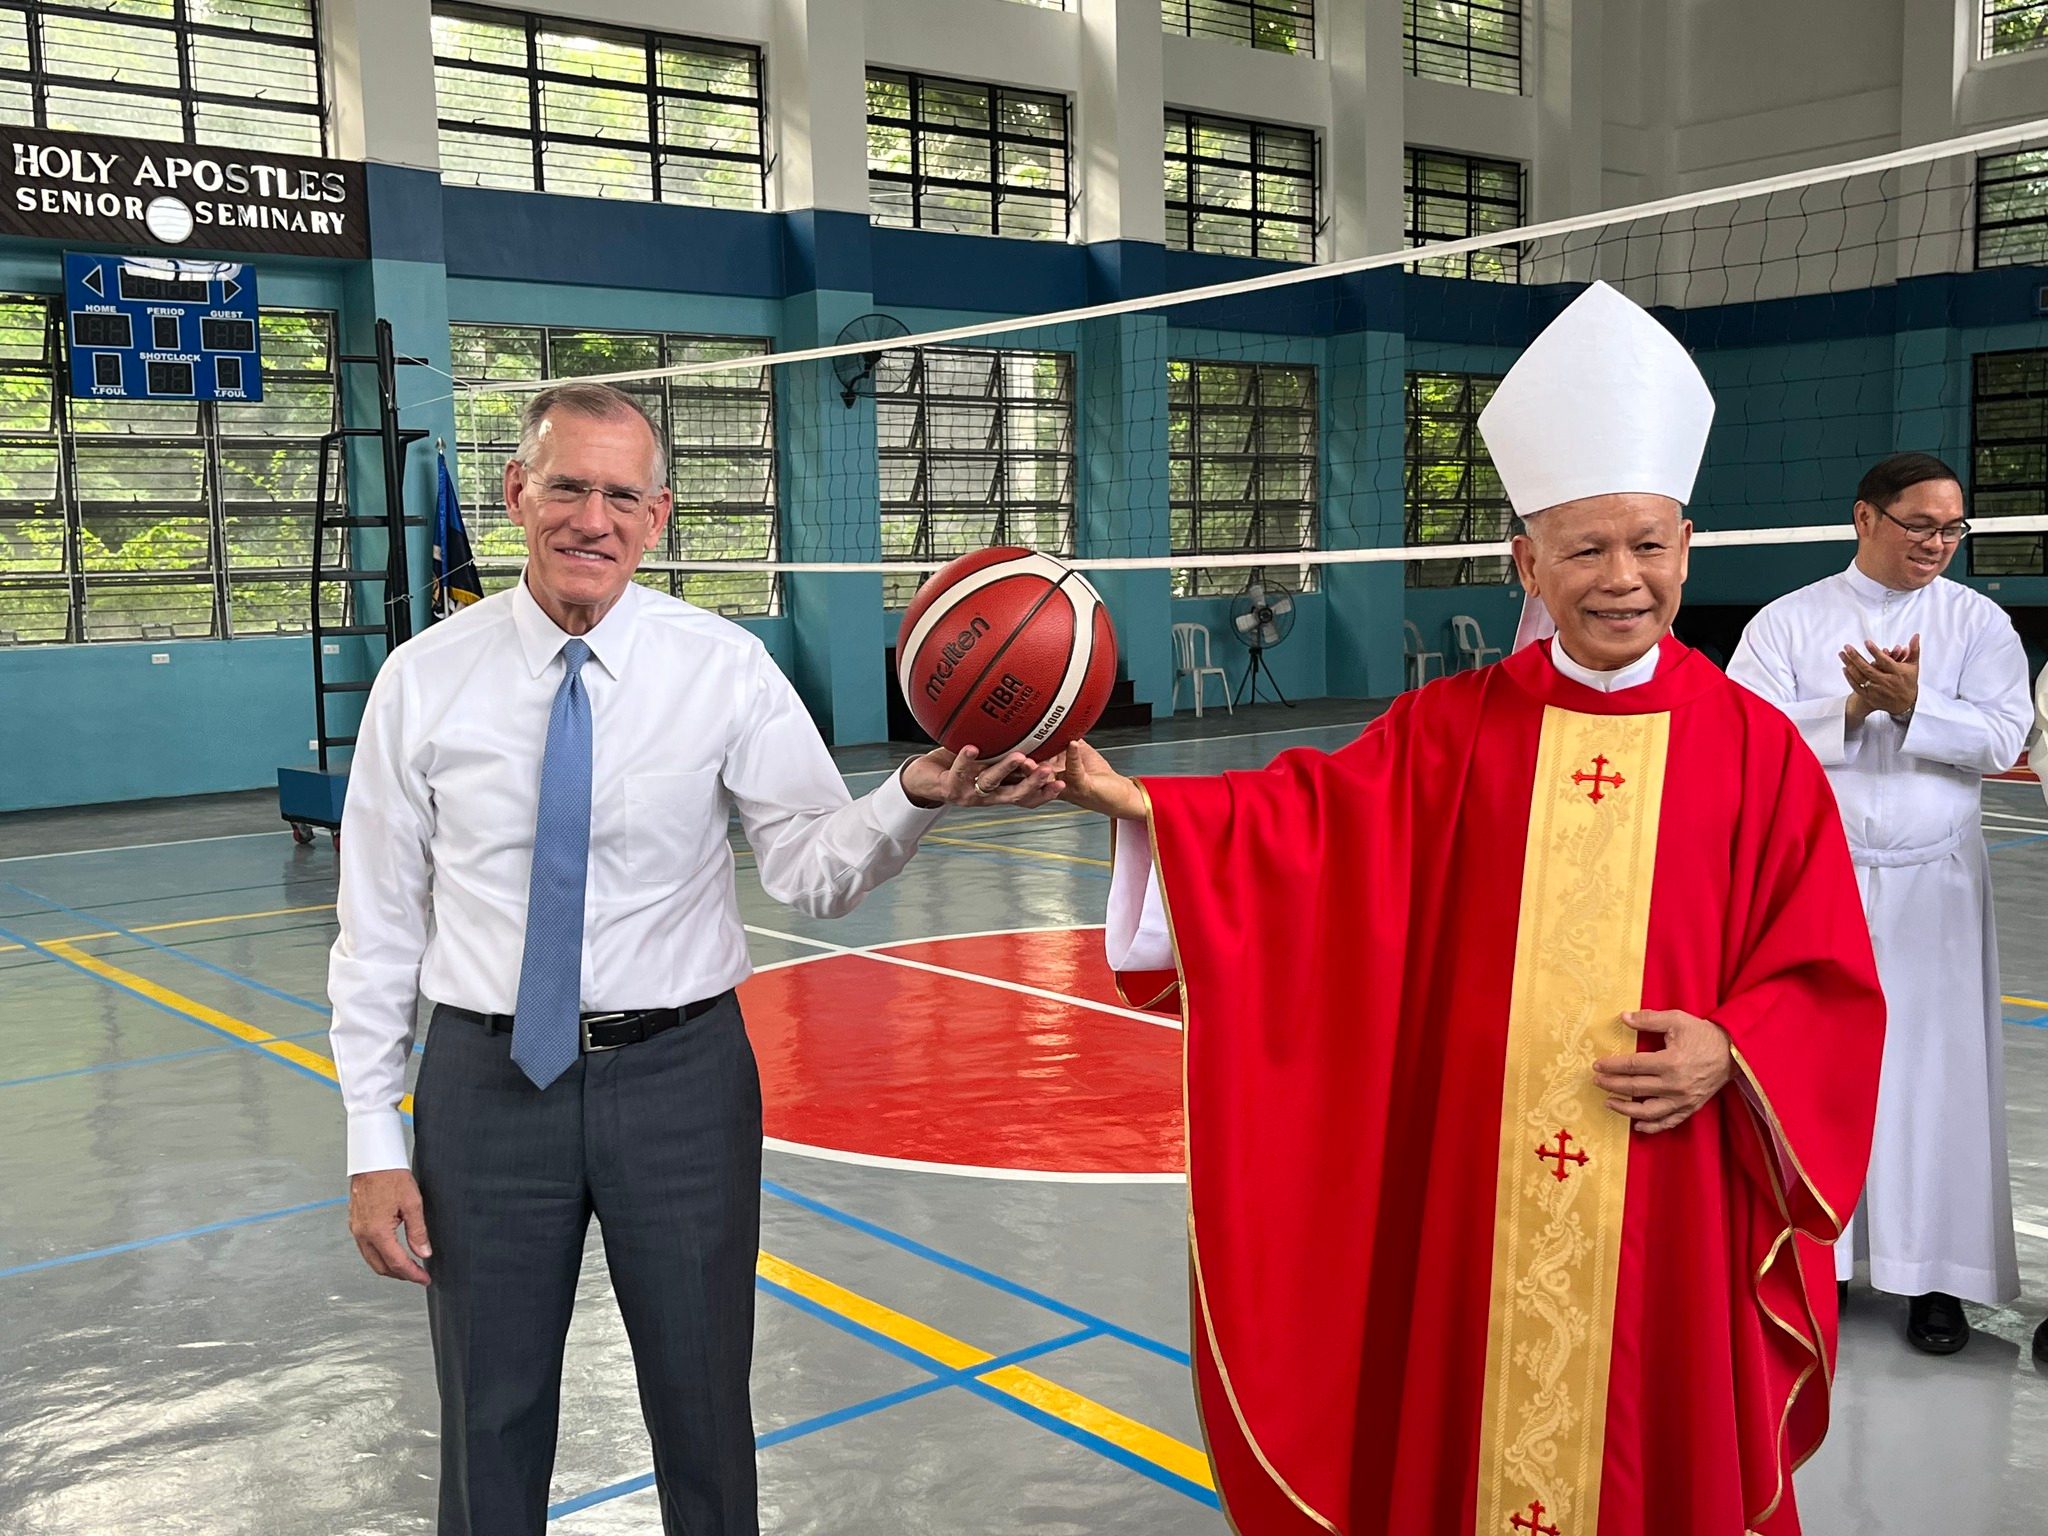 Dialogue at work: Mormons help renovate Catholic seminary gym in Philippines